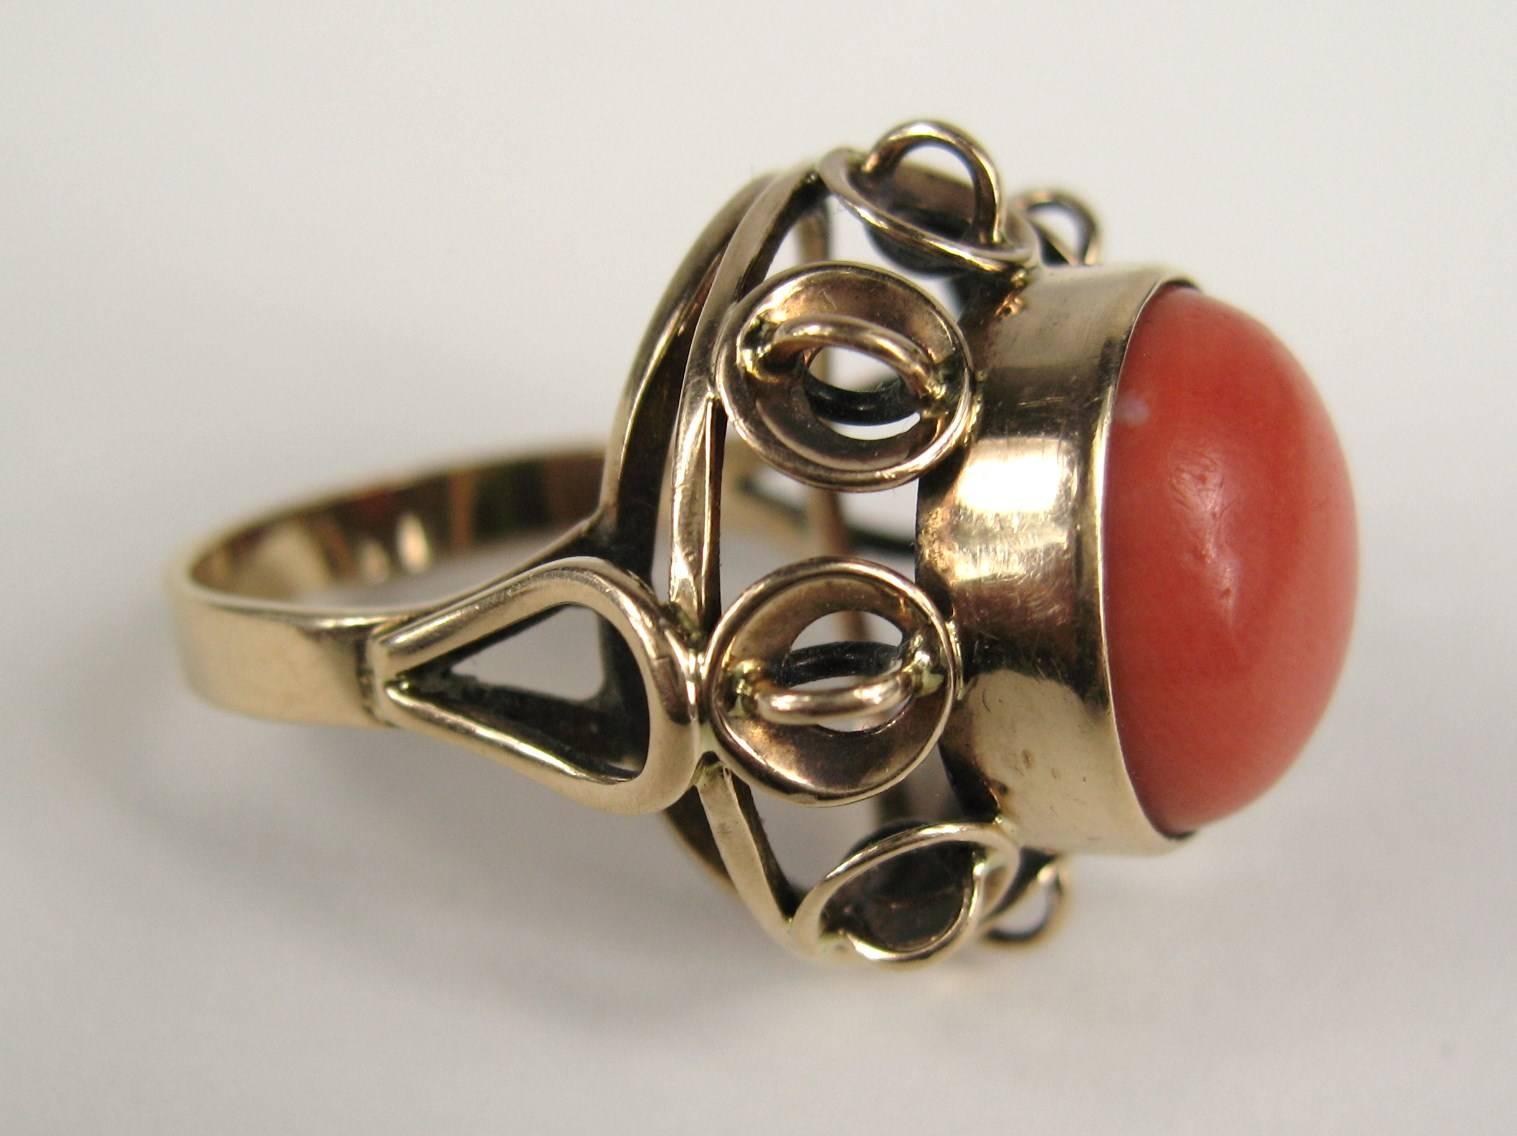 Wonderfully crafted Coral ring set in 14K gold. Measuring approximately .80 x .60 high sitting on your finger. Coral is 13.75mm x 8mm over 10 carats. The Ring is a size 8 and can be sized up or down by us or your jeweler. Be sure to check our store